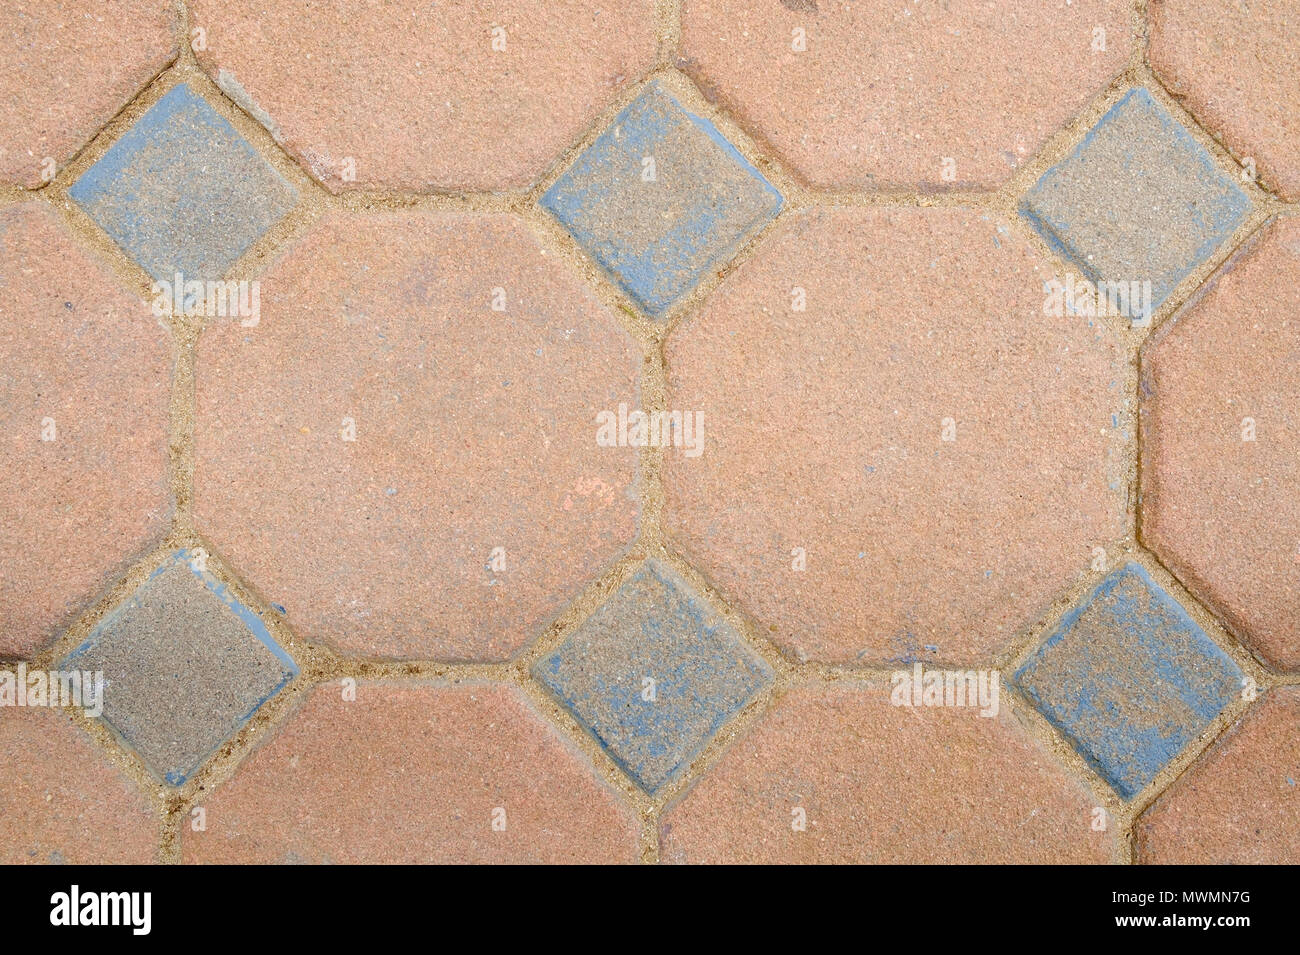 Pathway paved with stone block. Stock Photo